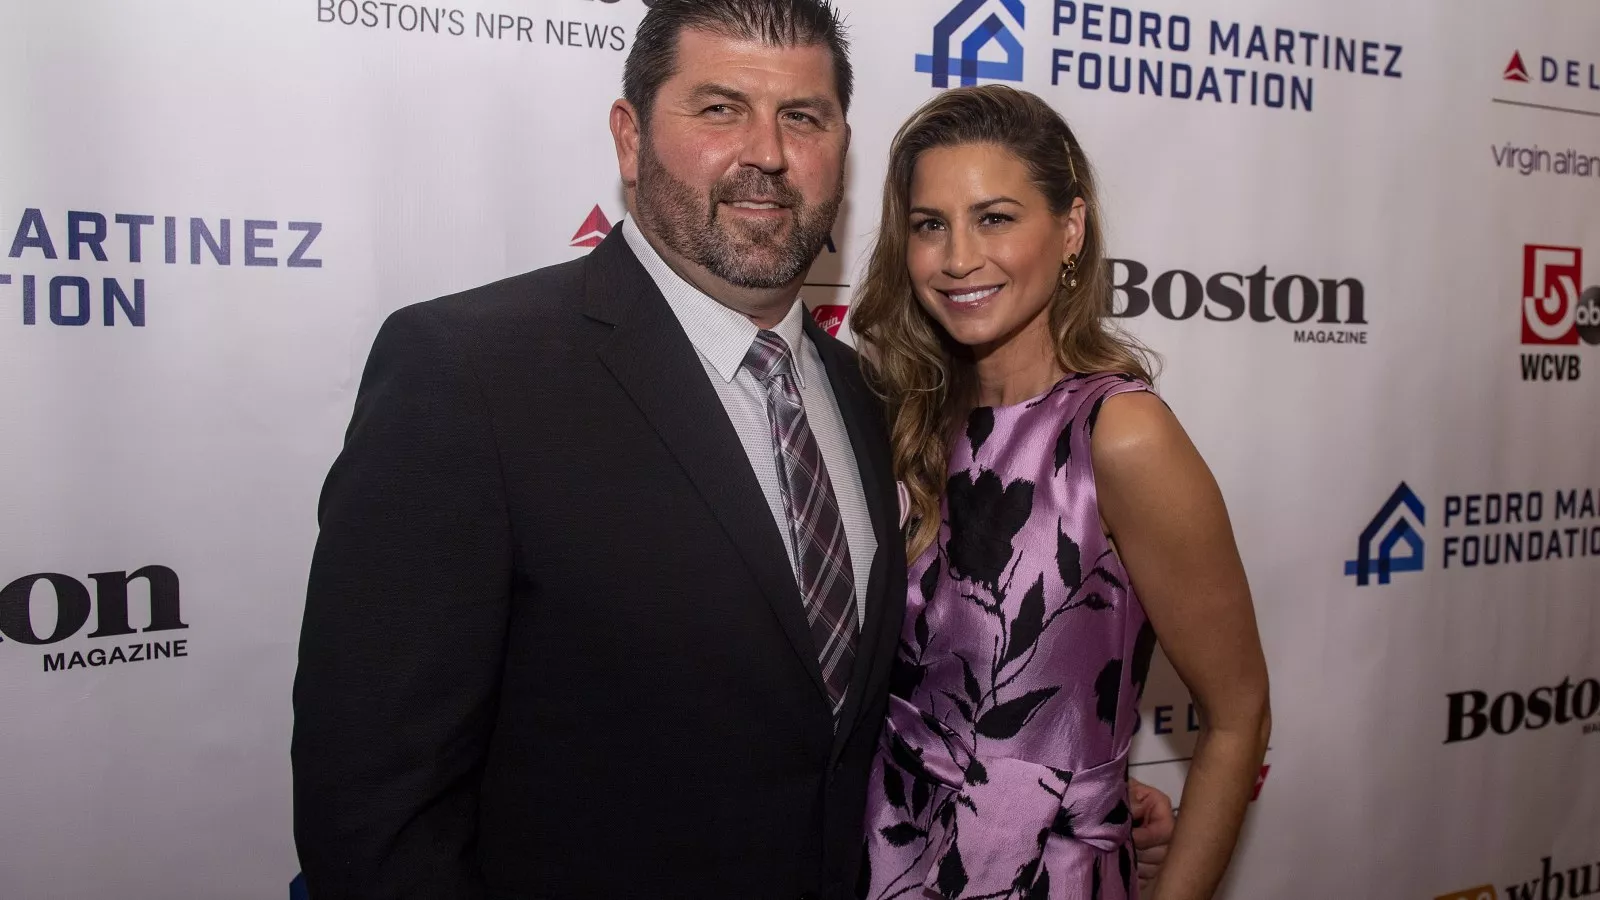 Home Team: Behind the plate with Catherine and Jason Varitek